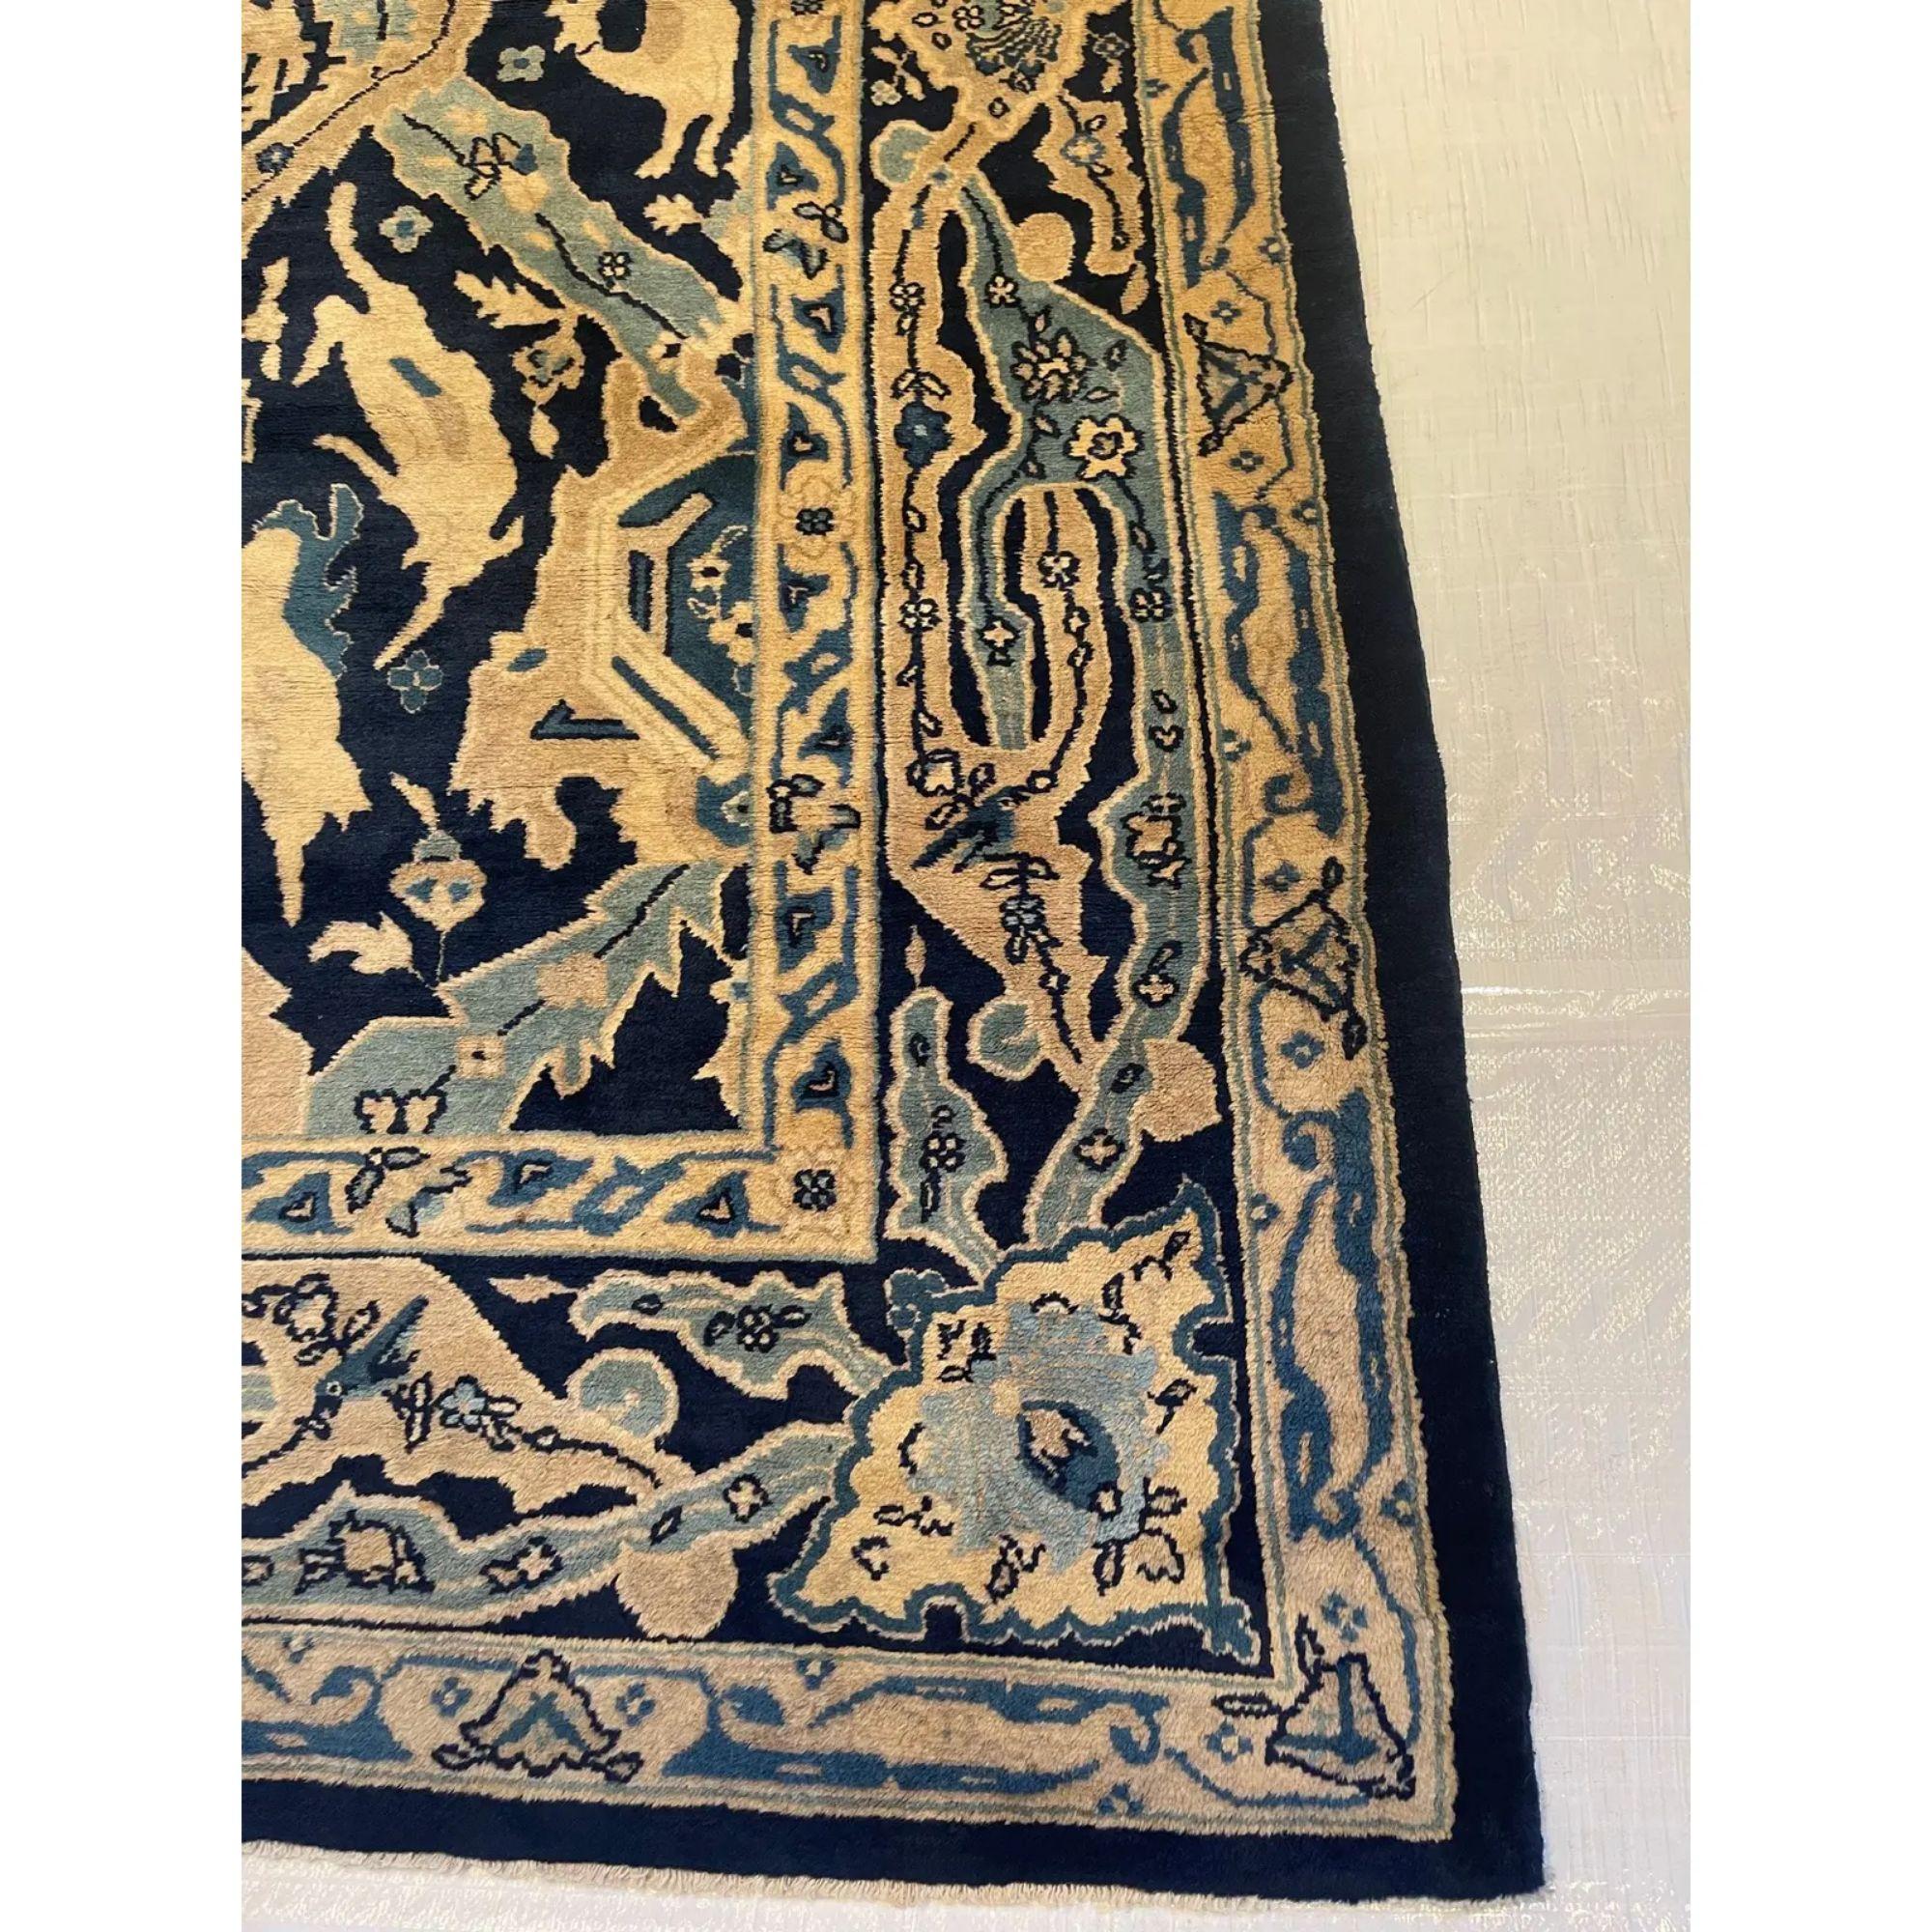 Chinese Export 1900s Antique Chinese Rug - 11'8'' X 9'2'' For Sale